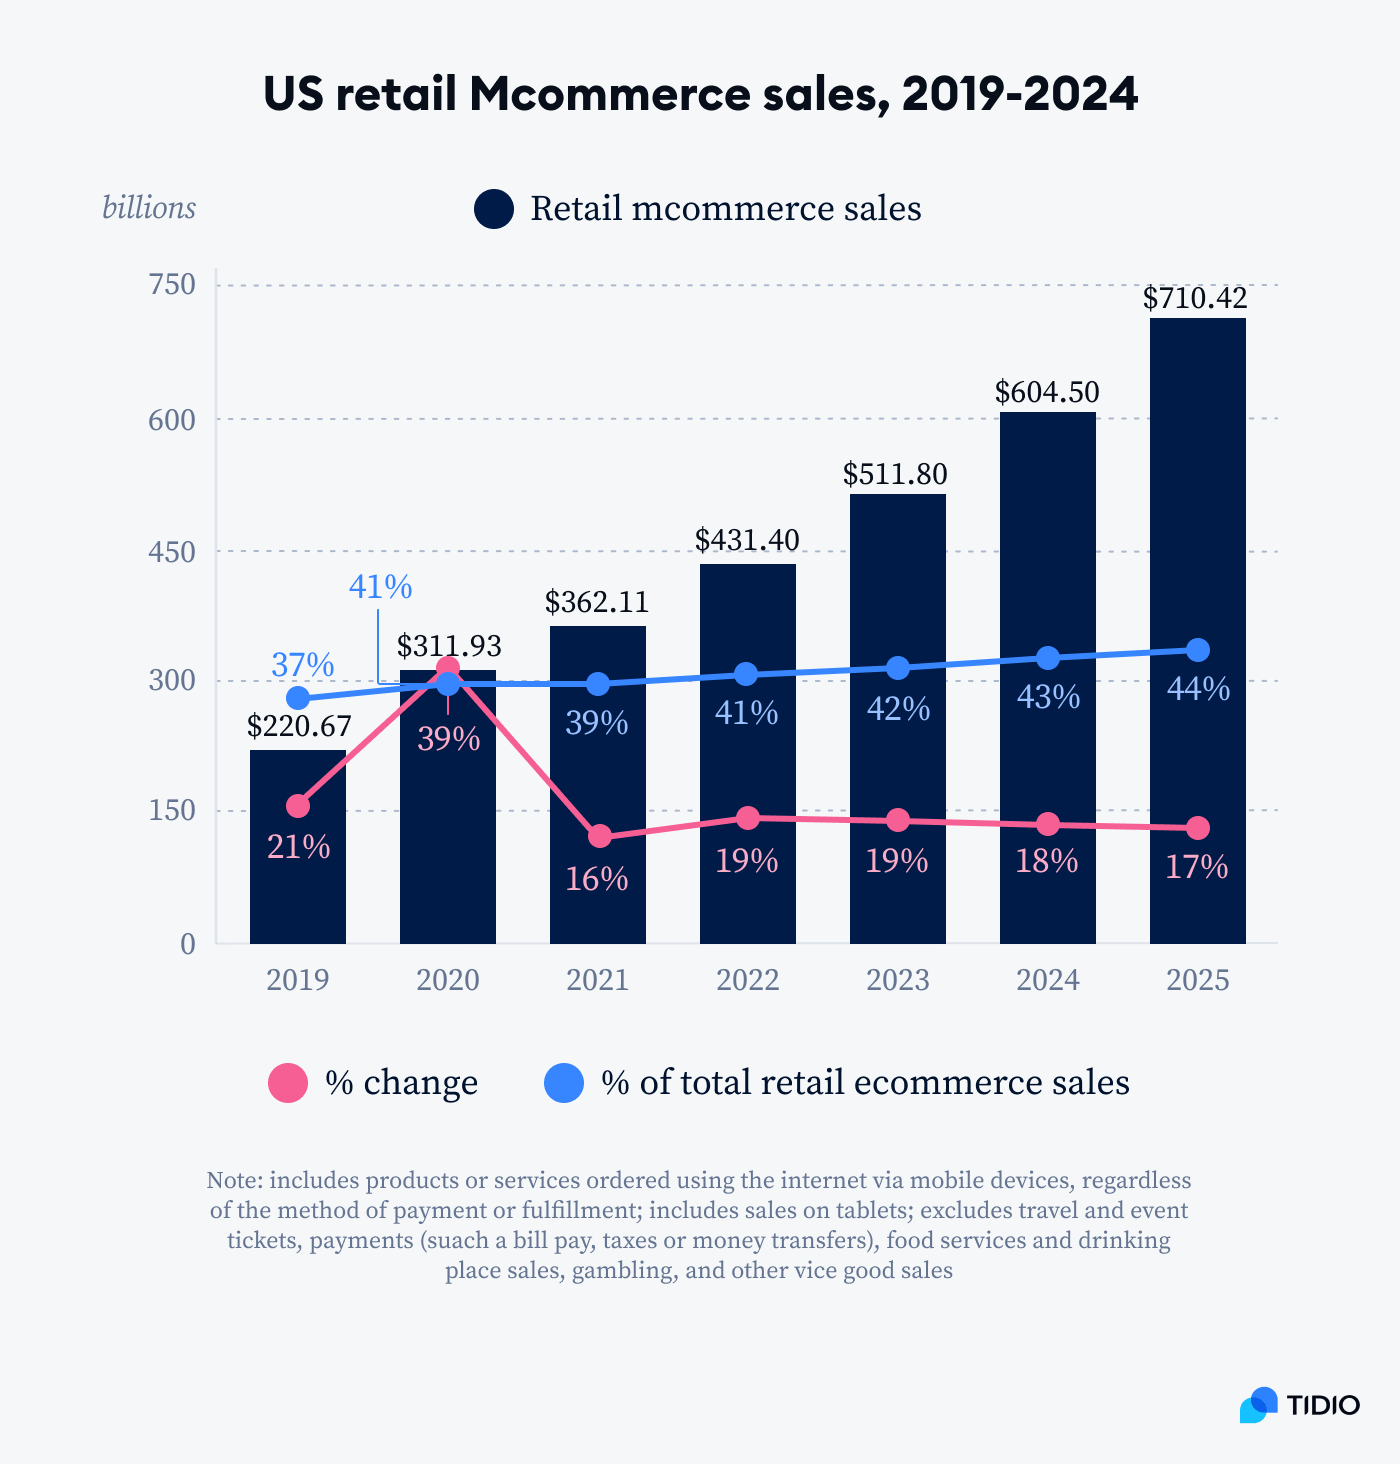 A graph that shows how Retail mcommerce sales is estimated to grow from 221 billion to 710 billion in 2025